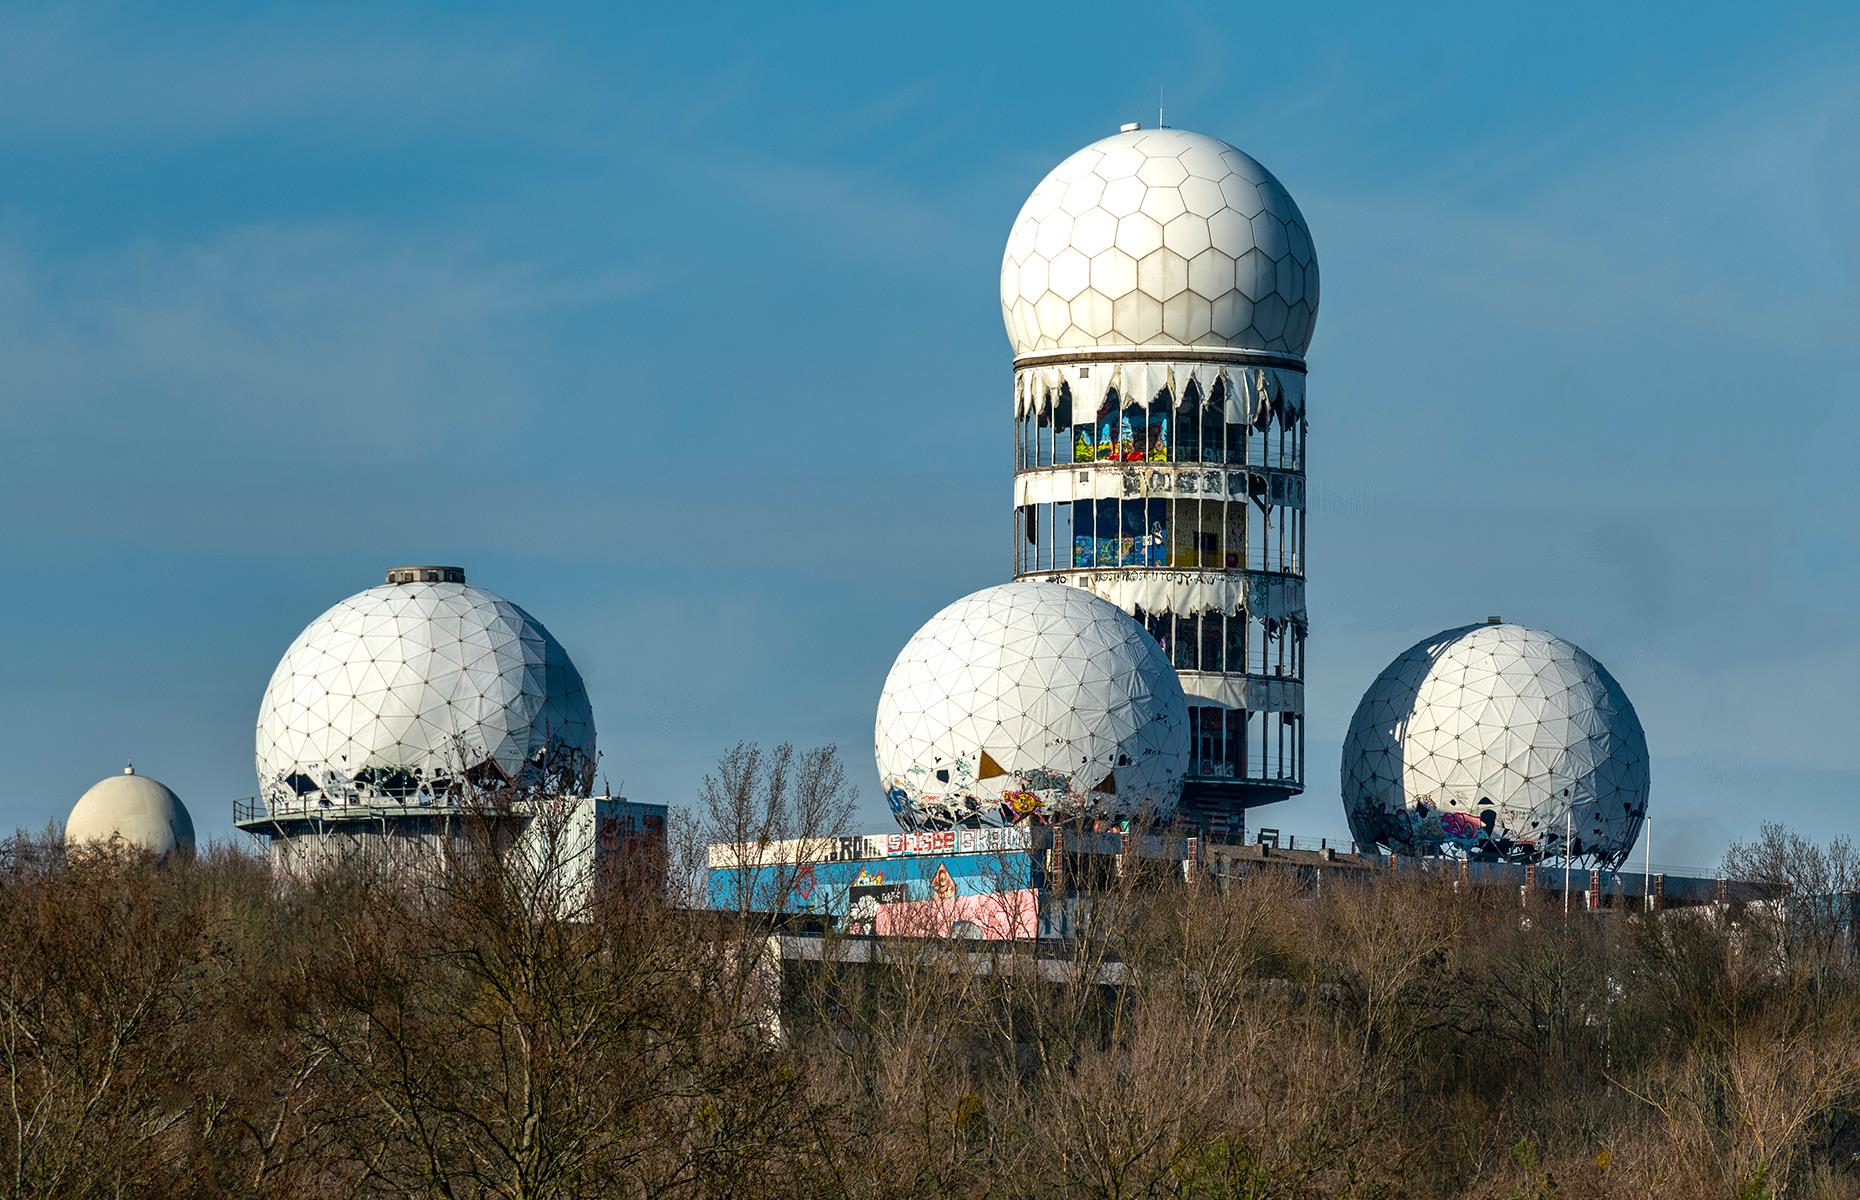 <p>The strange domed towers of Teufelsberg look like something out of a sci-fi movie. They actually form part of a US listening station used during the Cold War and are perched on an artificial hill, made from piled up rubble over the years. Modern-day visitors can usually take history tours of the building and drink in the views from its observation platform. Availability and access may be altered due to COVID-19, though, so <a href="https://www.visitberlin.de/en/teufelsberg">check for updates</a> before you head out.</p>